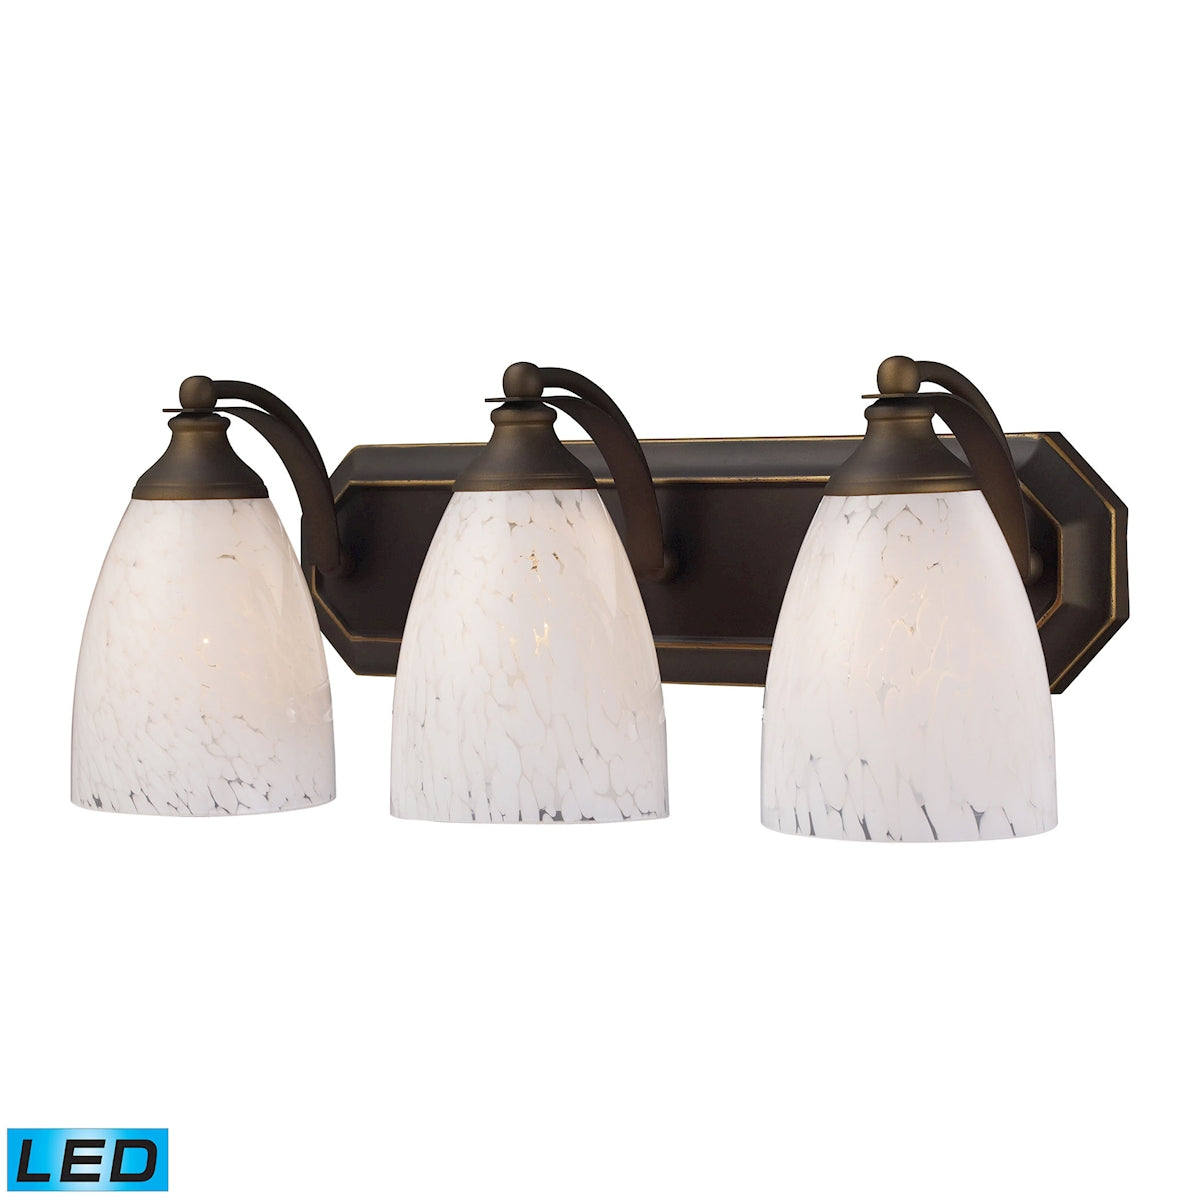 ELK Lighting 570-3B-SW-LED Mix-N-Match Vanity 3-Light Wall Lamp in Aged Bronze with Snow White Glass - Includes LED Bulbs